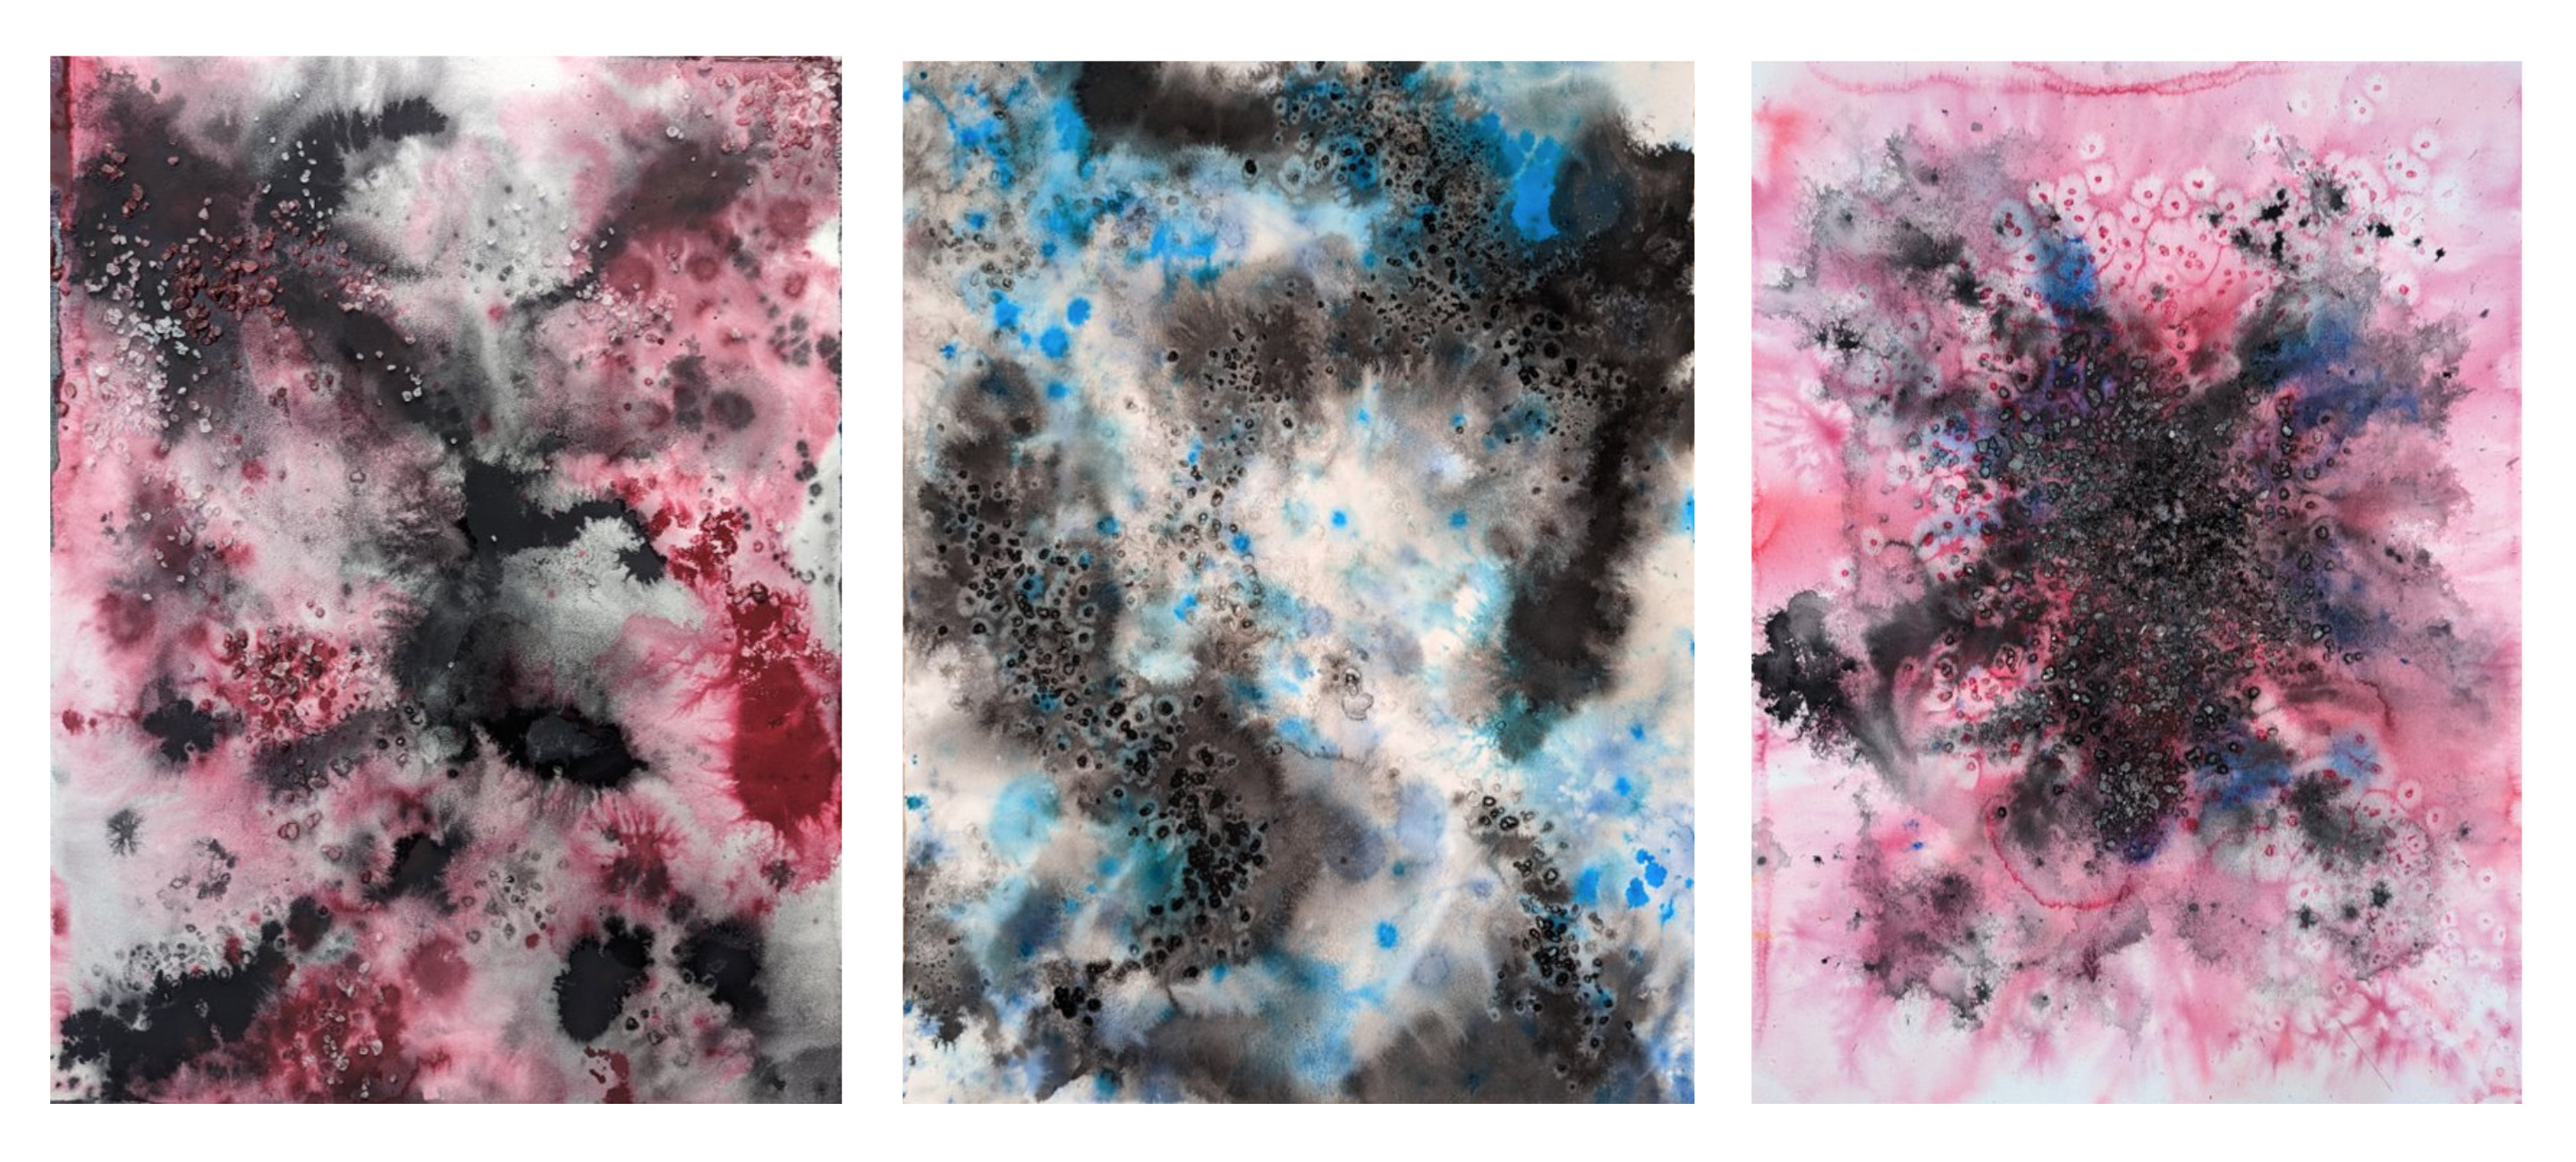 Negative Emotion Paintings / Negative Emotion Paintings from left to right:
“Self-Hate, Anxiety”
“Depression, Brain Fog”
“Everything is Fine (It’s Not)”
Created with fluid acrylics, coarse salt, and watercolor paper. 22.5”x30” each